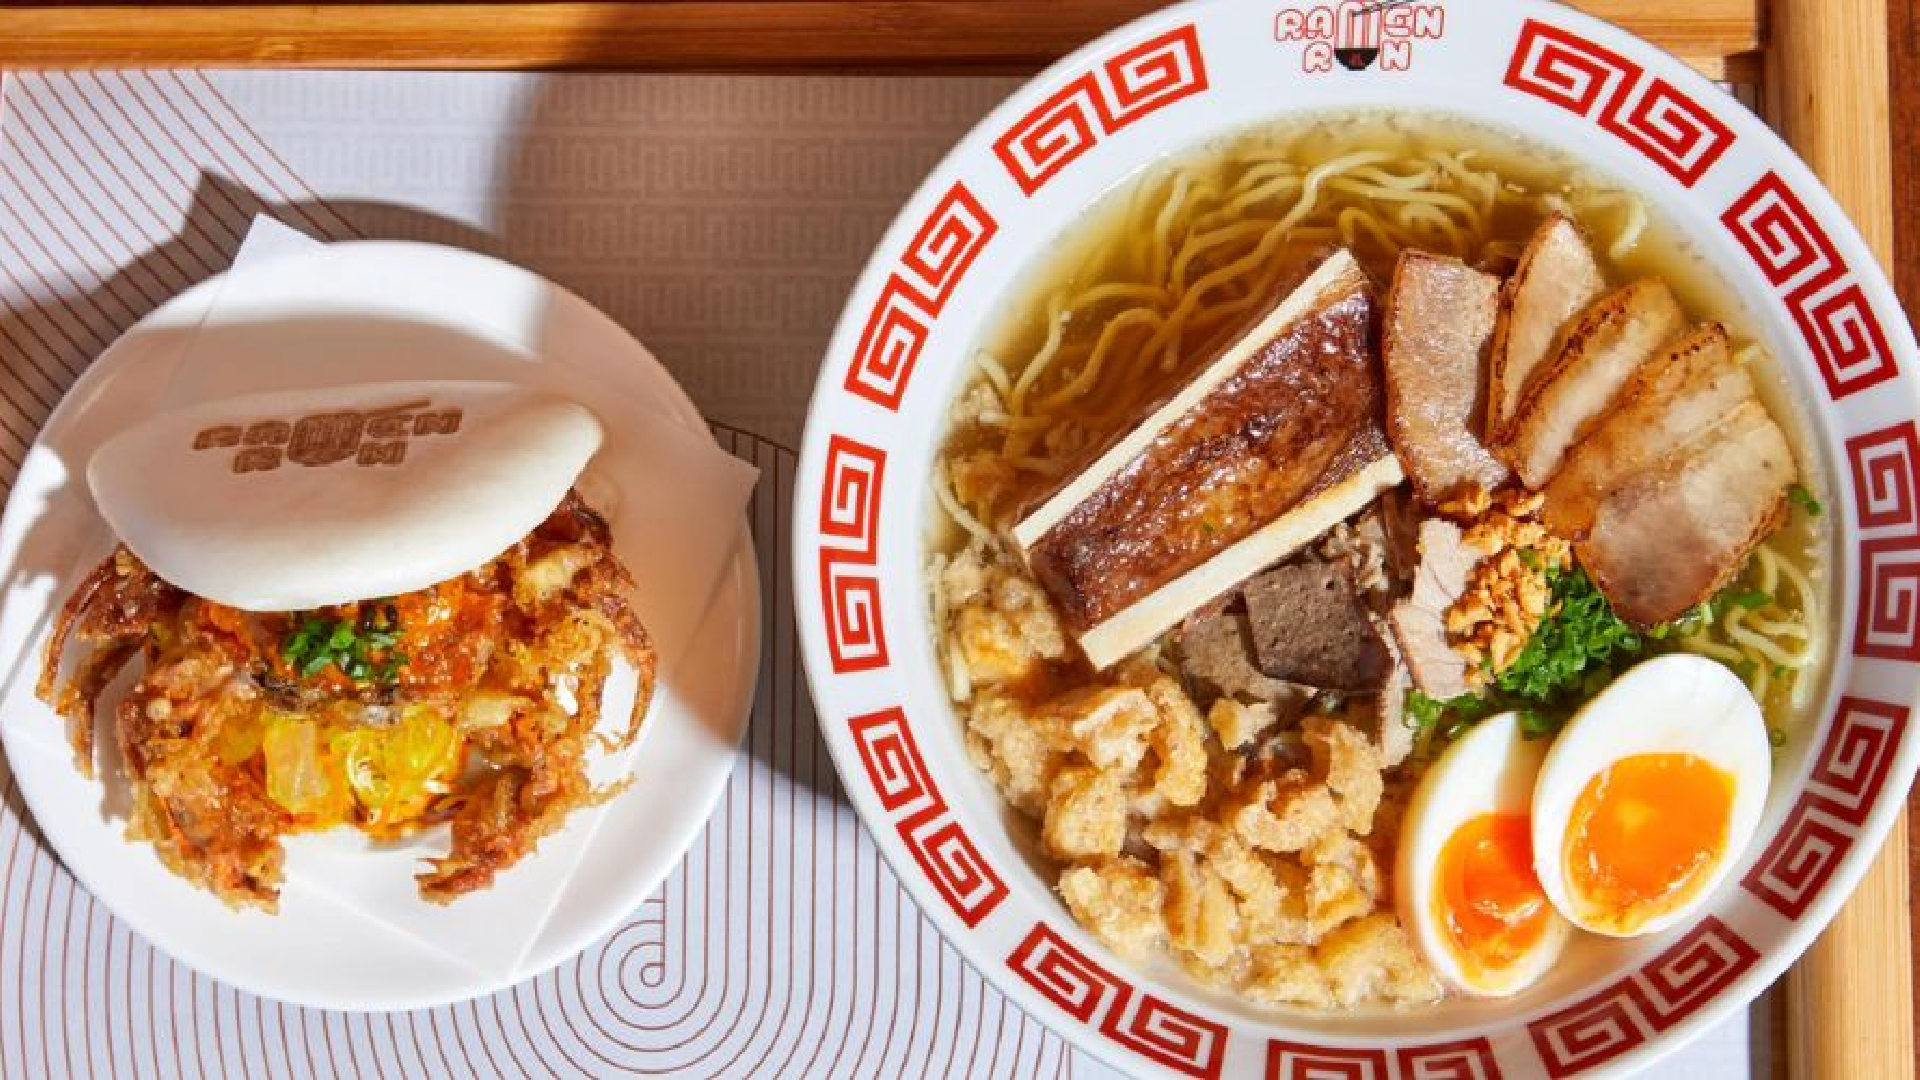 For a limited time only, Ramen Ron and Margarita Forés have teamed up to bring you Batchoy Ramen!